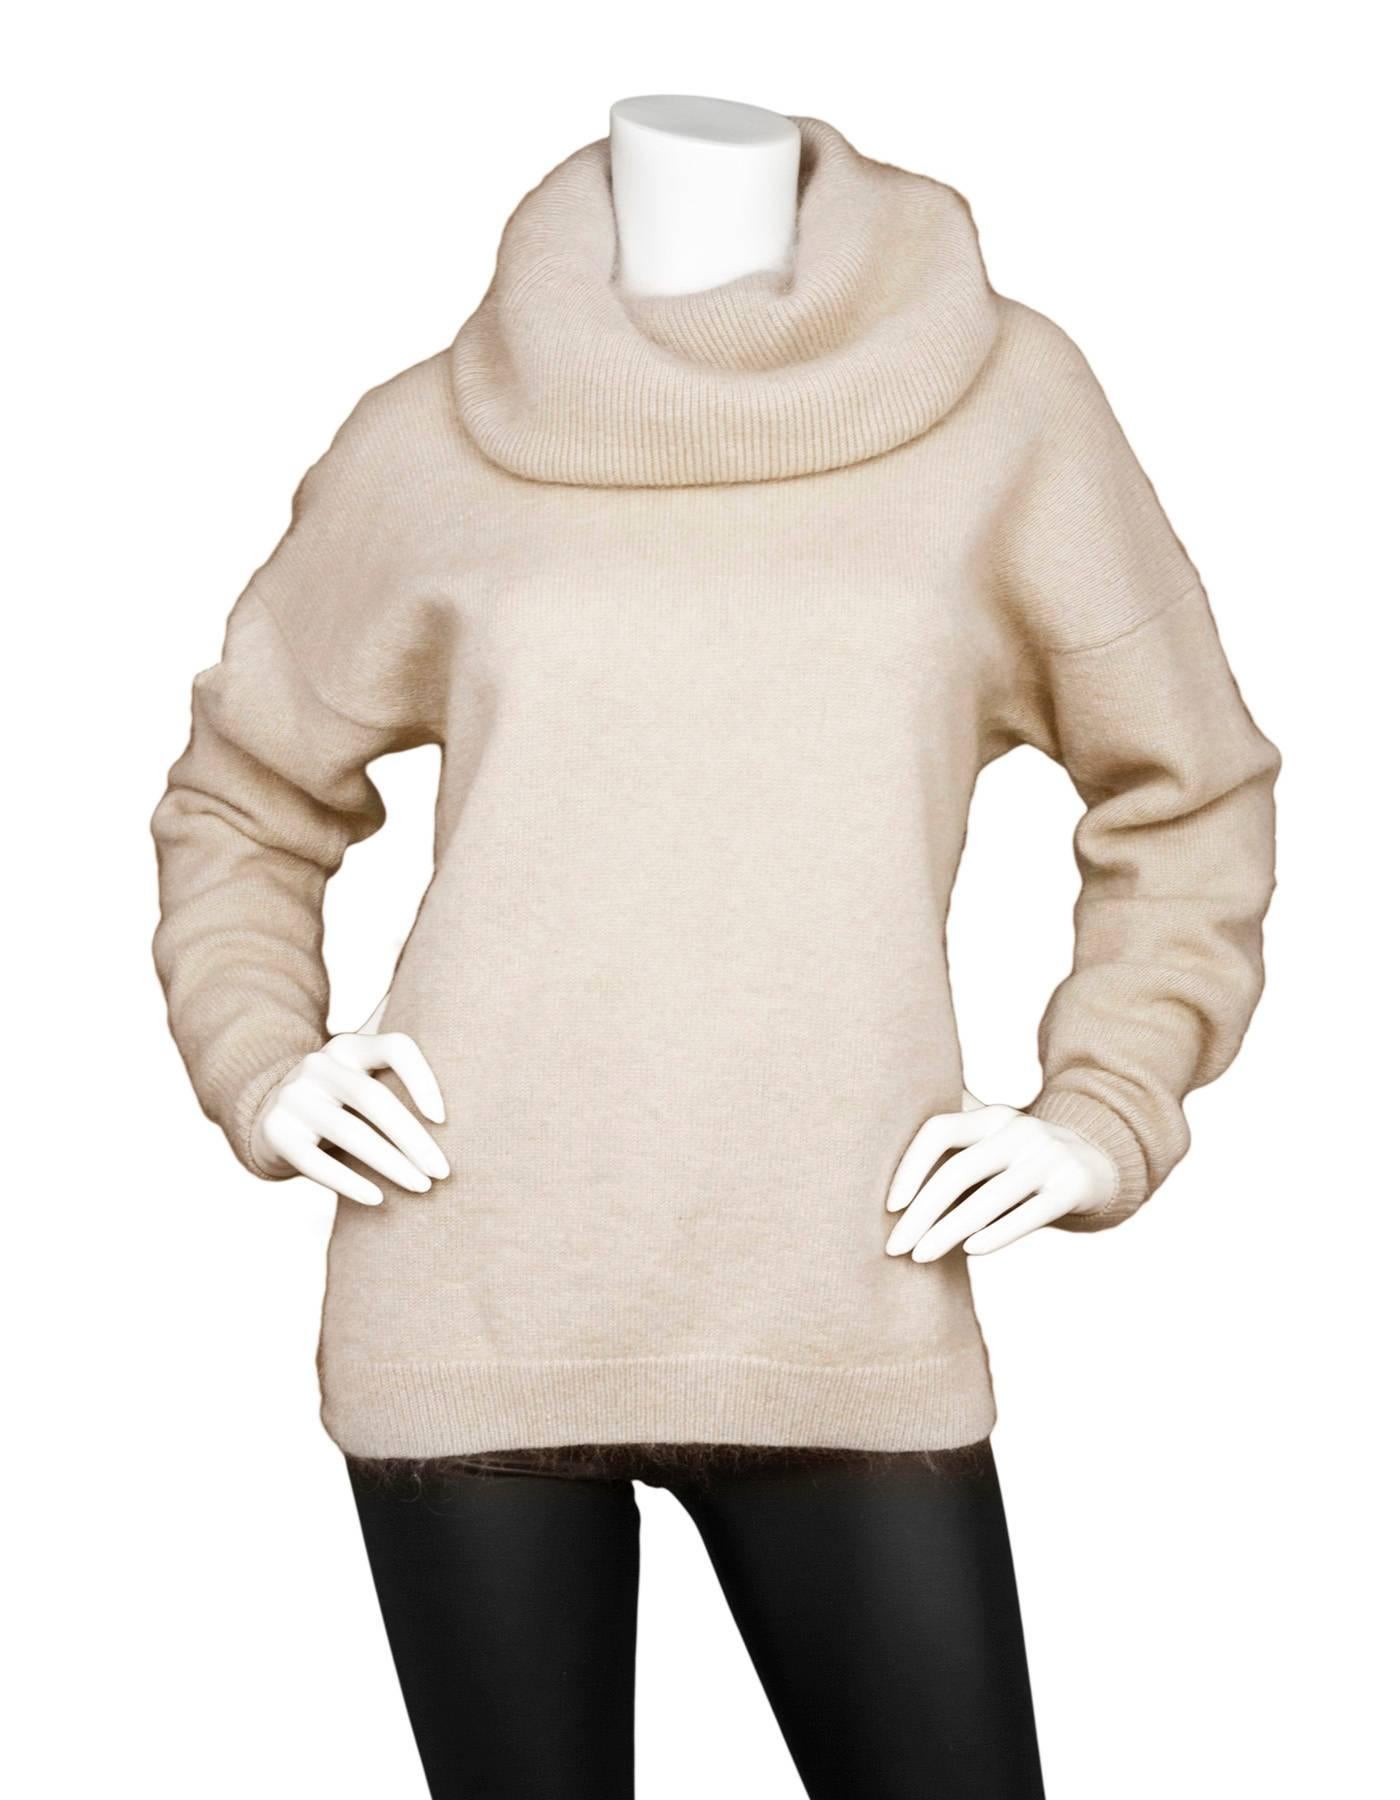 Acne Studios Oatmeal Wool Oversized Sweater Sz S

Features optional cowl neck

Made In: China
Color: Oatmeal
Composition: 60% wool, 25% mohair, 15% nylon
Closure/Opening: Pull over
Overall Condition: Excellent pre-owned condition

Marked Size: